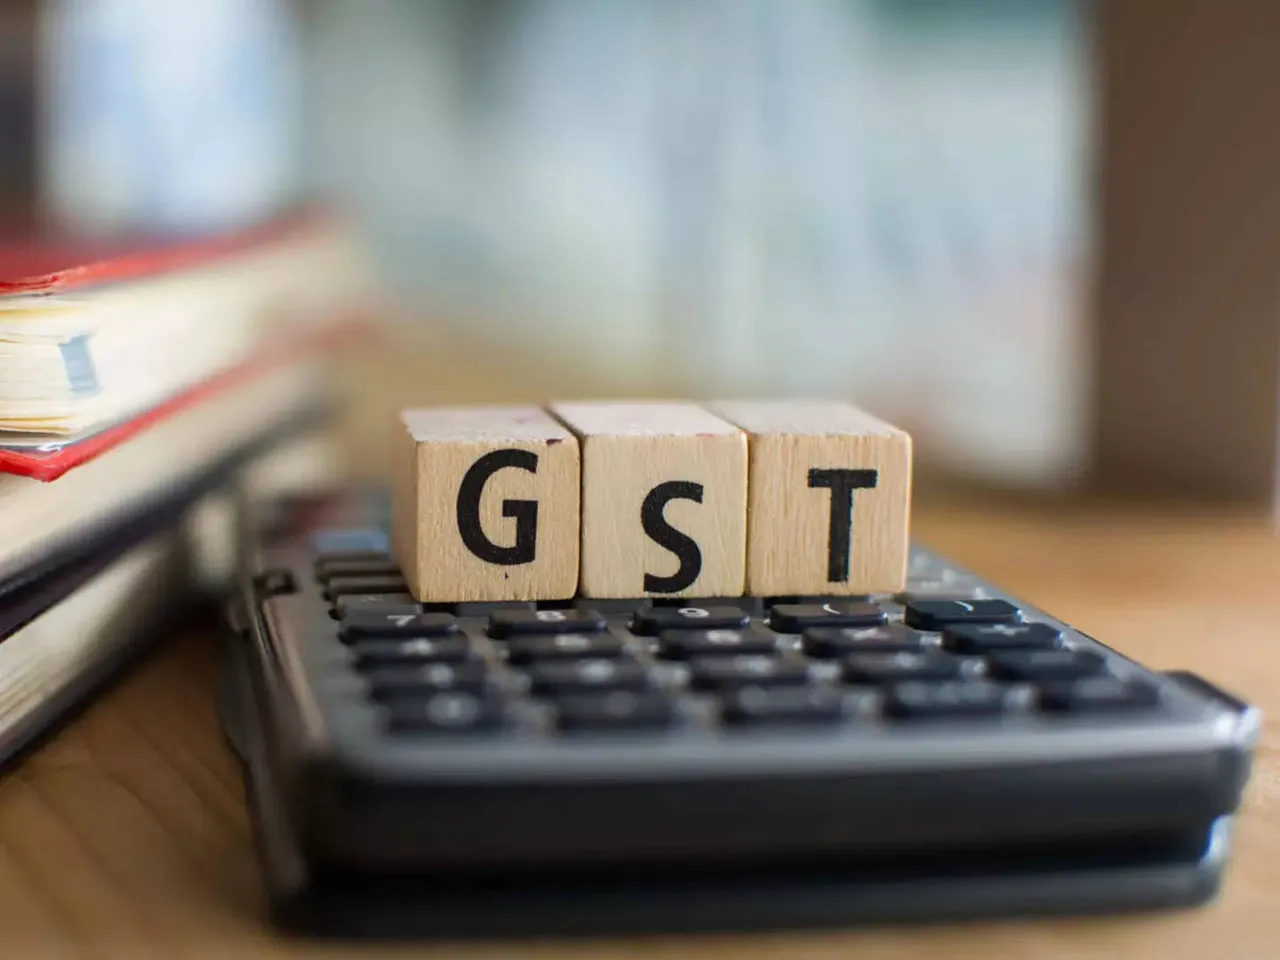 India Inc feels time ripe for next phase of GST reform: Deloitte Survey